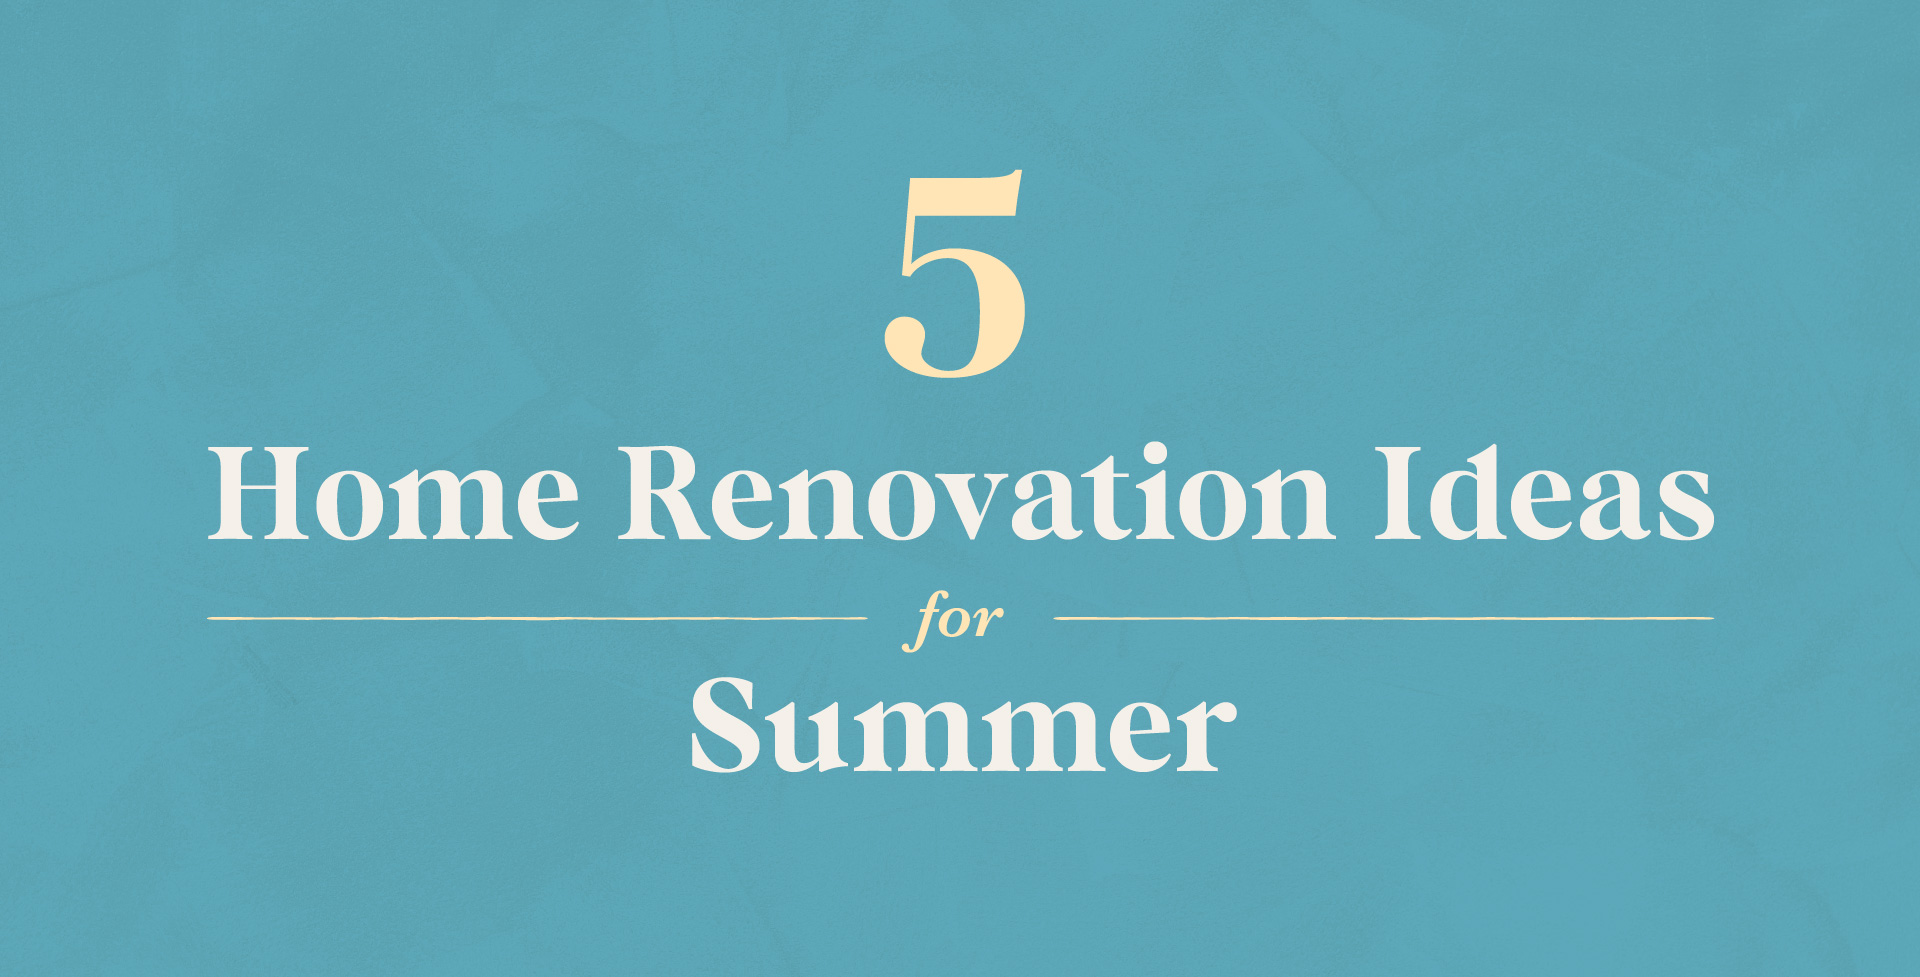 A blue graphic has white and light yellow text that reads "5 Home Renovation Ideas for Summer."